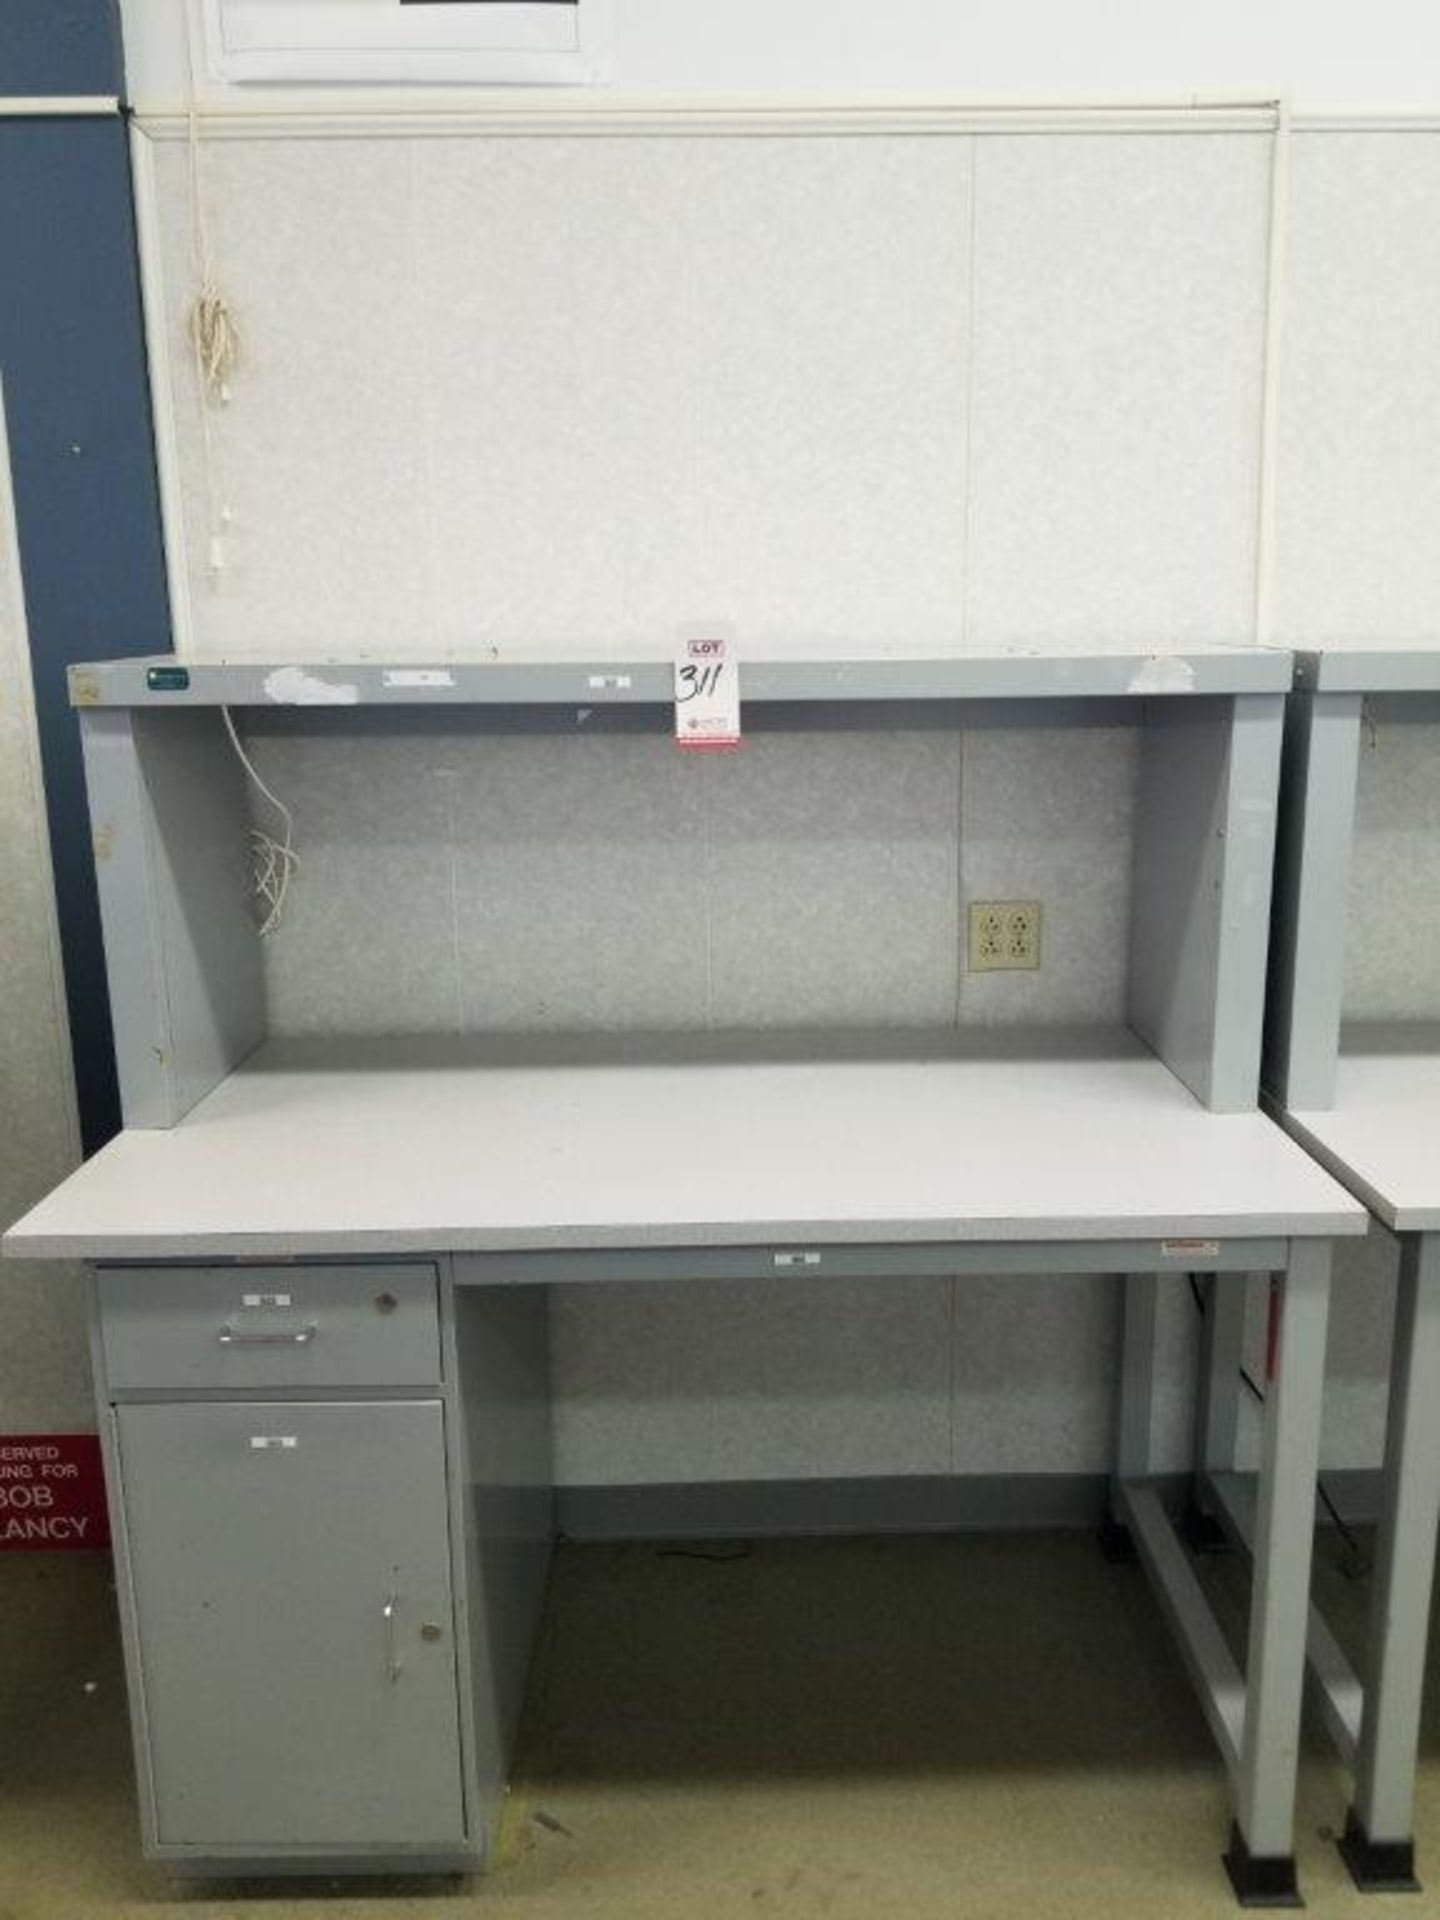 WORKPLACE SYSTEMS INC. 60" X 30" MODULAR BENCH SYSTEM, W/ (1) SINGLE DRAWER/DOOR CABINET AND UPPER